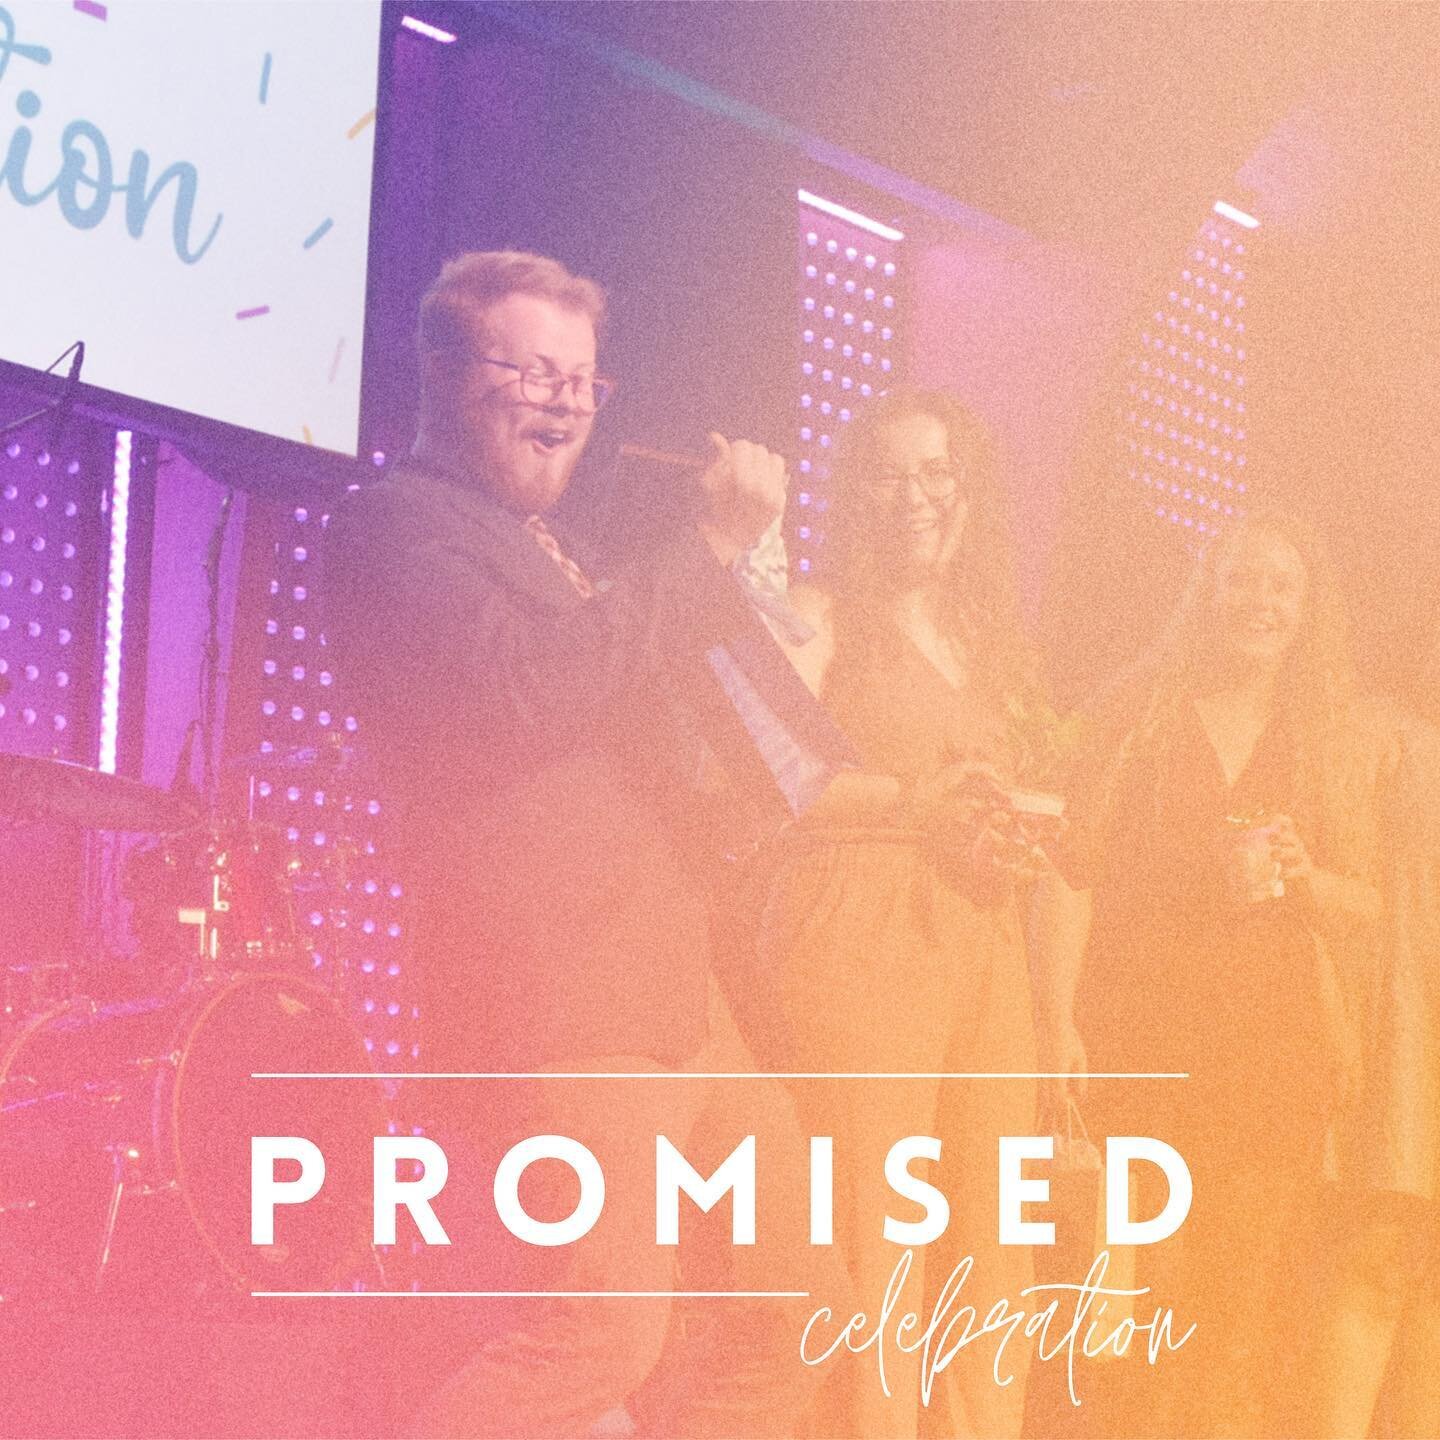 Tonight is THE NIGHT🥳🥳 

We&rsquo;ll be celebrating what the Lord has done this year and the promises He has fulfilled🙌 

We can&rsquo;t wait to see you at C2! Dinner will be promptly at 7pm (you had to register by last week🥲) so arrive anytime a